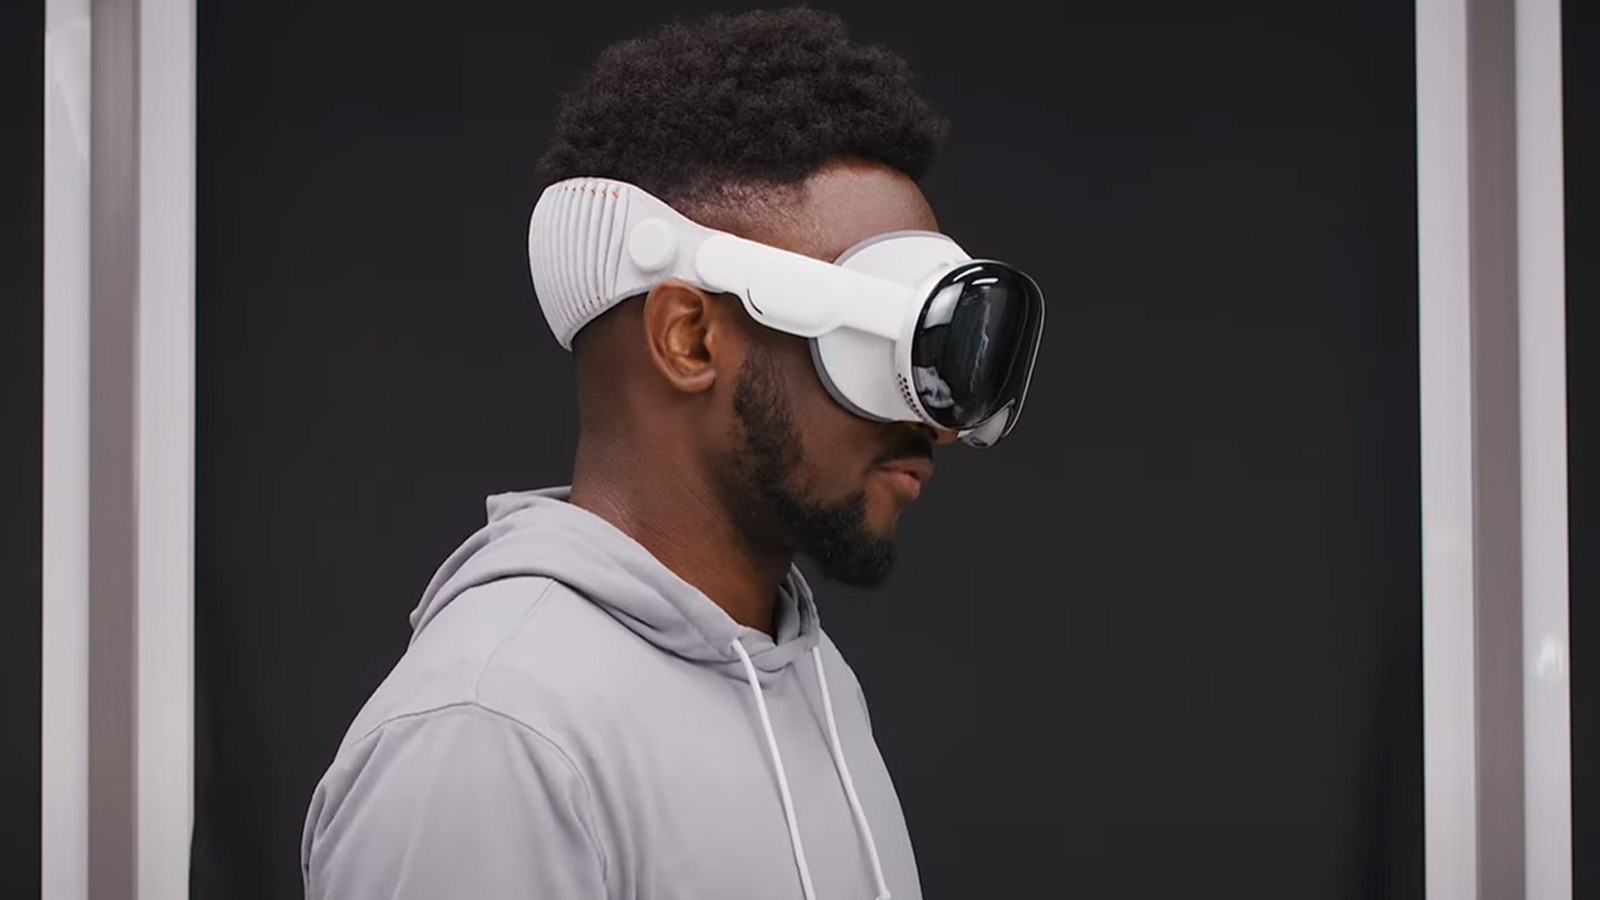 Marques Brownlee goes hands-on with Apple Vision Pro headset in unboxing video